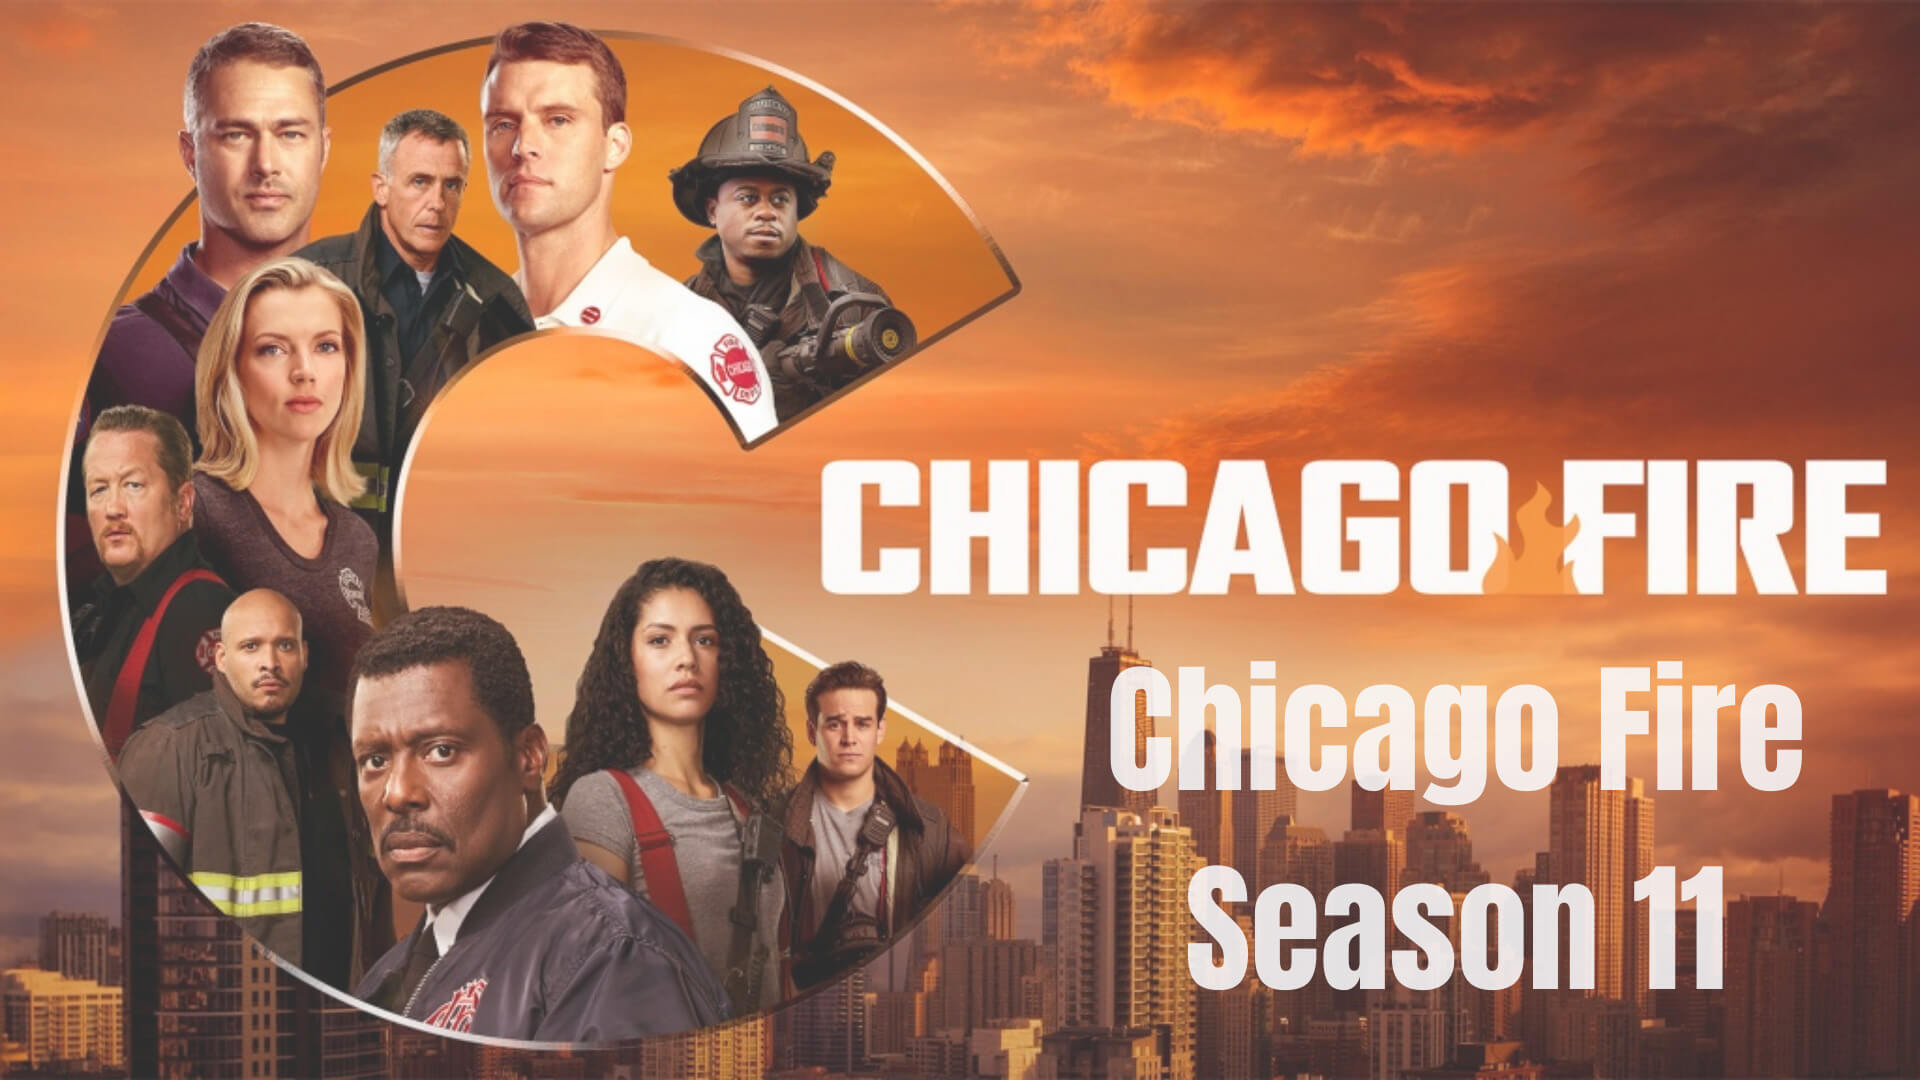 How Many Episodes Will be in season 11 of Chicago Fire?